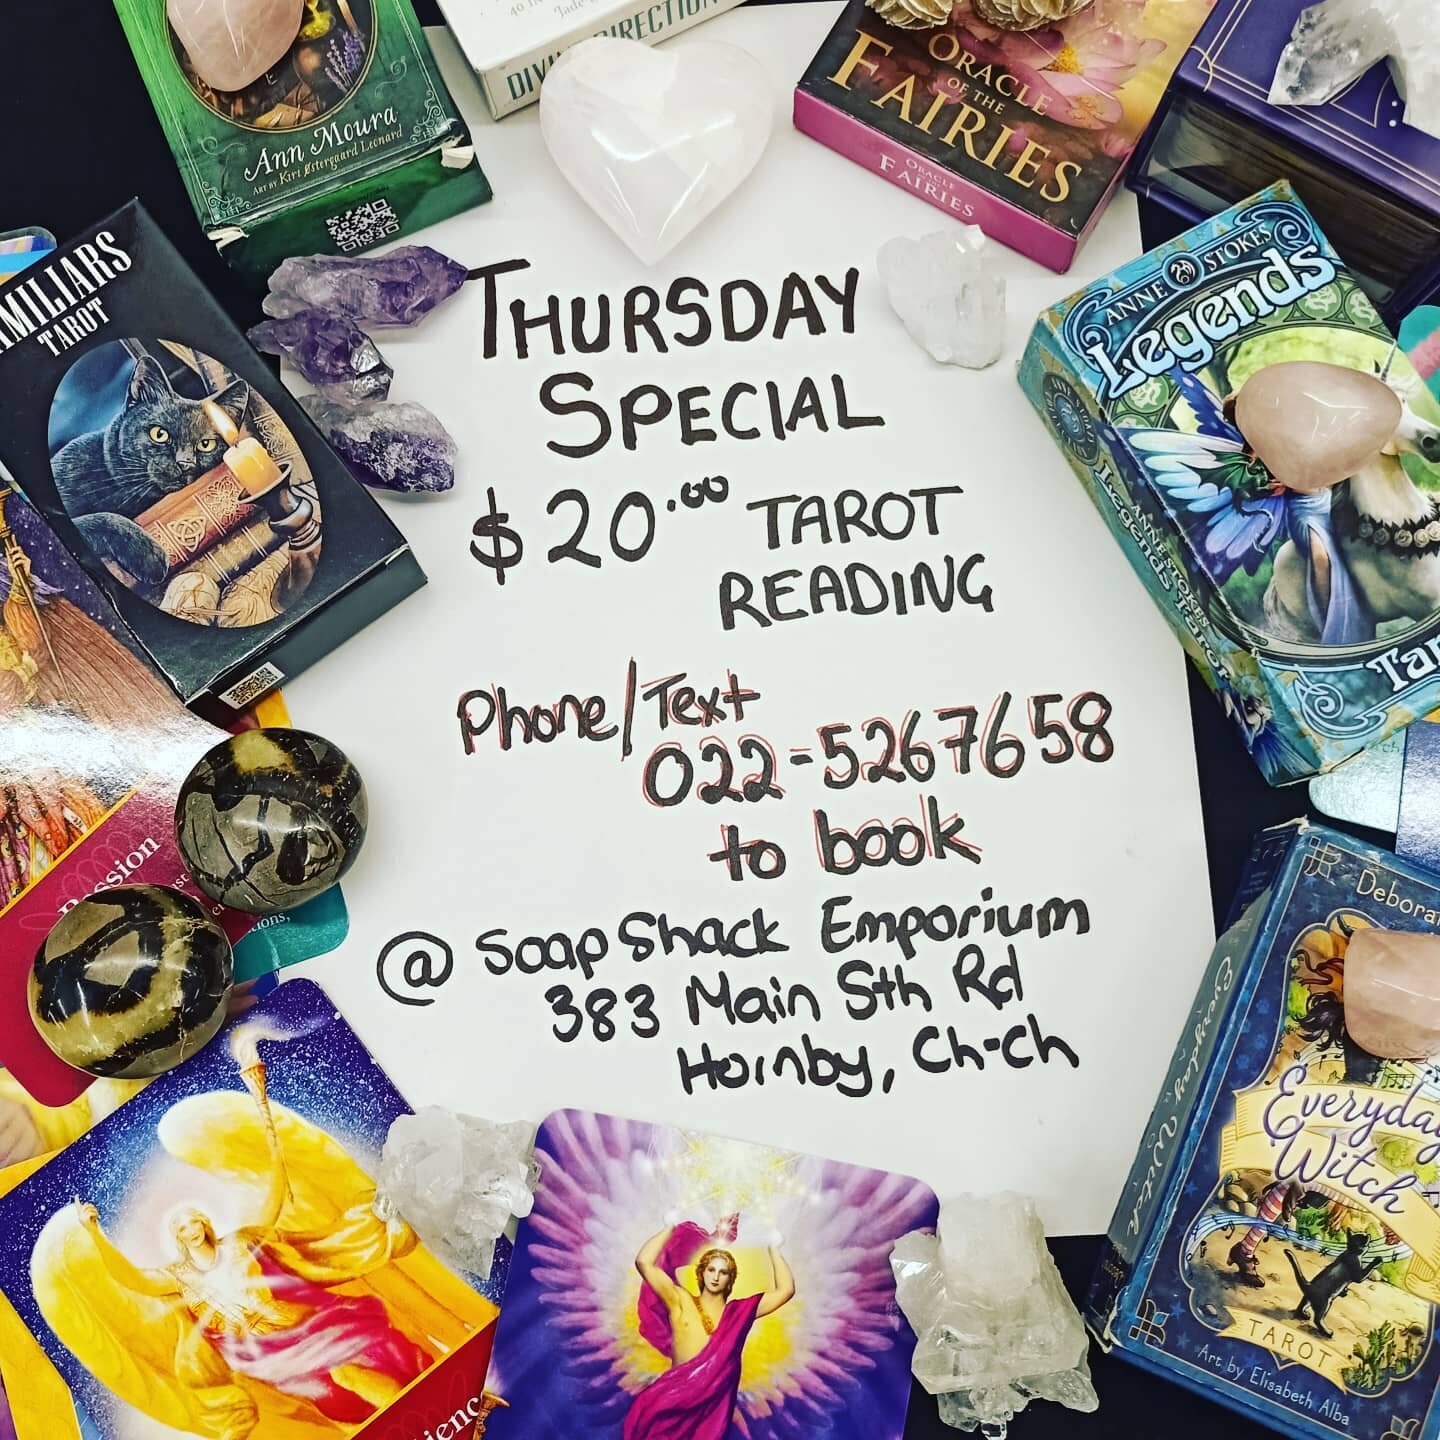 $20 Tarot readings 
Every Thursday through March with our extremely talented Sarah
Phone/text 022-5267658
To secure a booking 
@ Soap Shack Emporium
383 Main South Road
Hornby
Christchurch 

BLESSED BE 

#tarot #spoilyourself #shampoobars #balms #bes